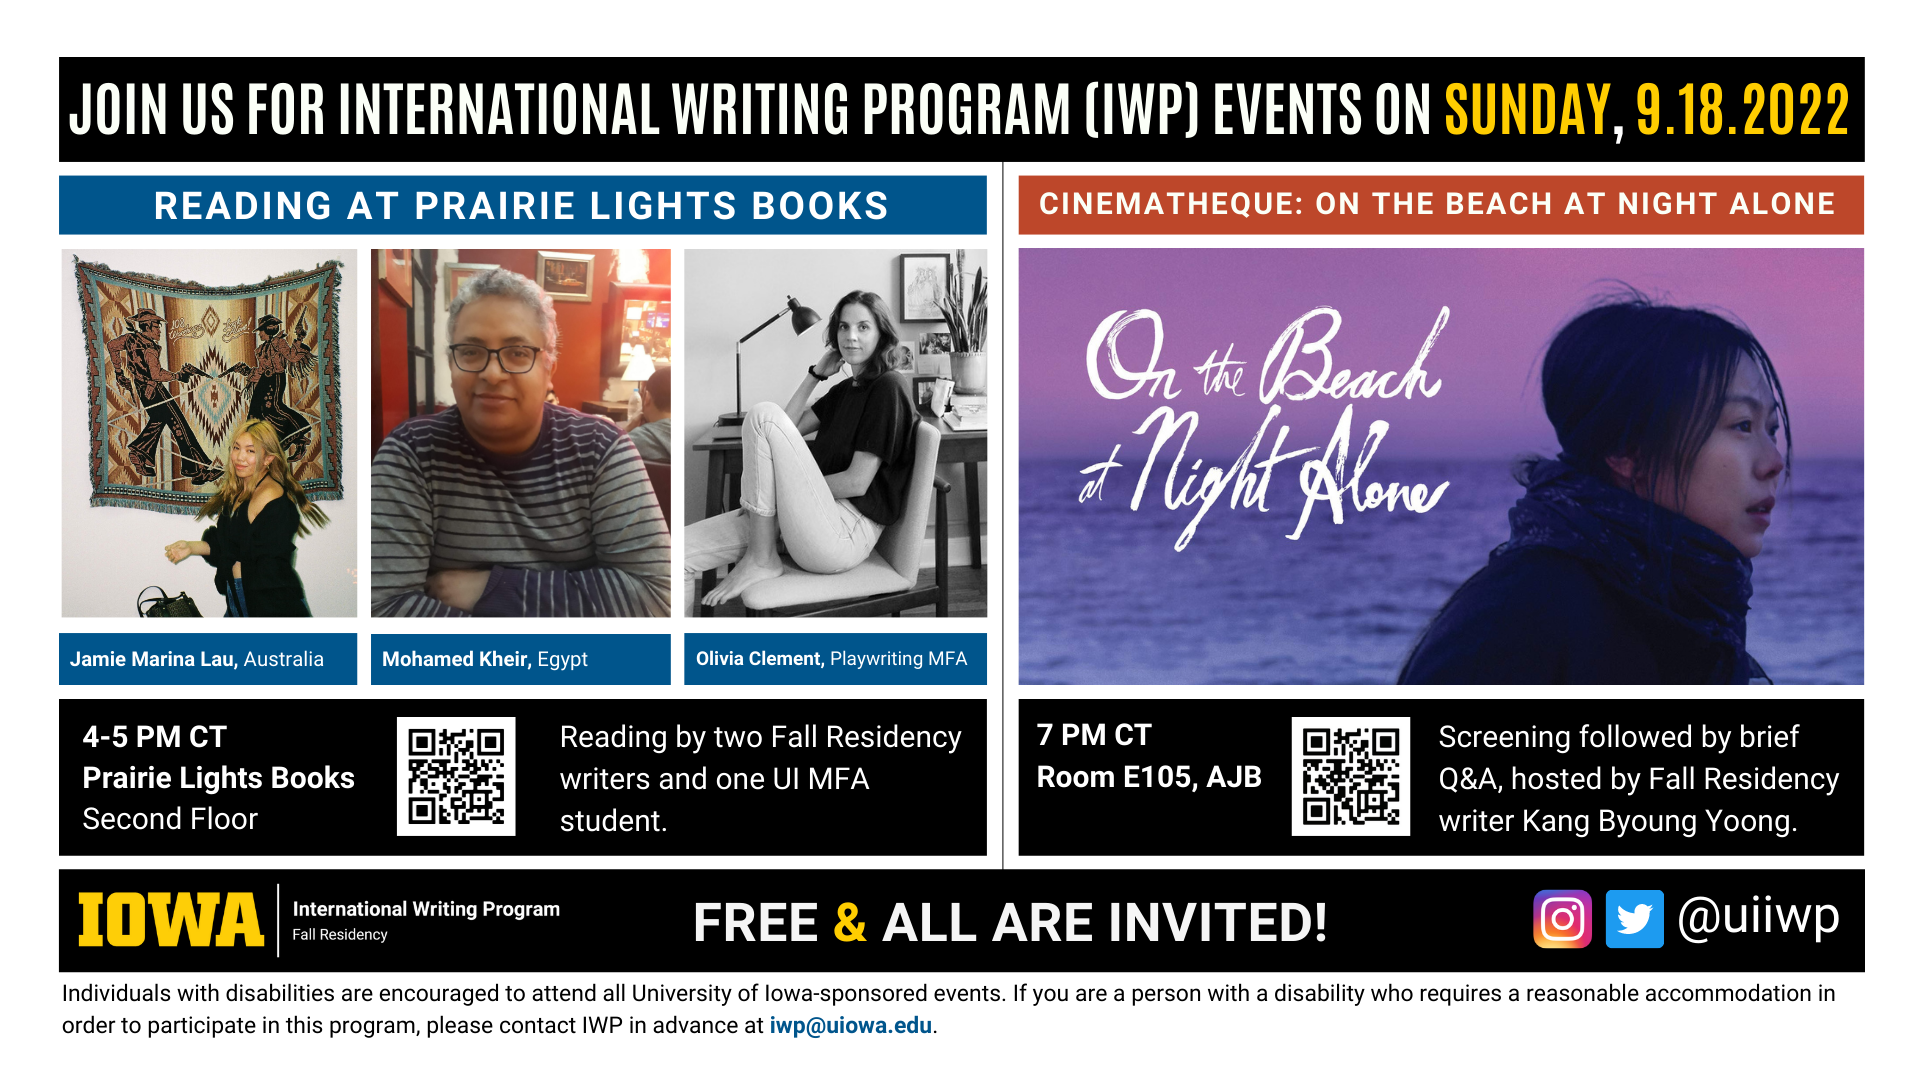 IWP events for Sunday, Sept 18